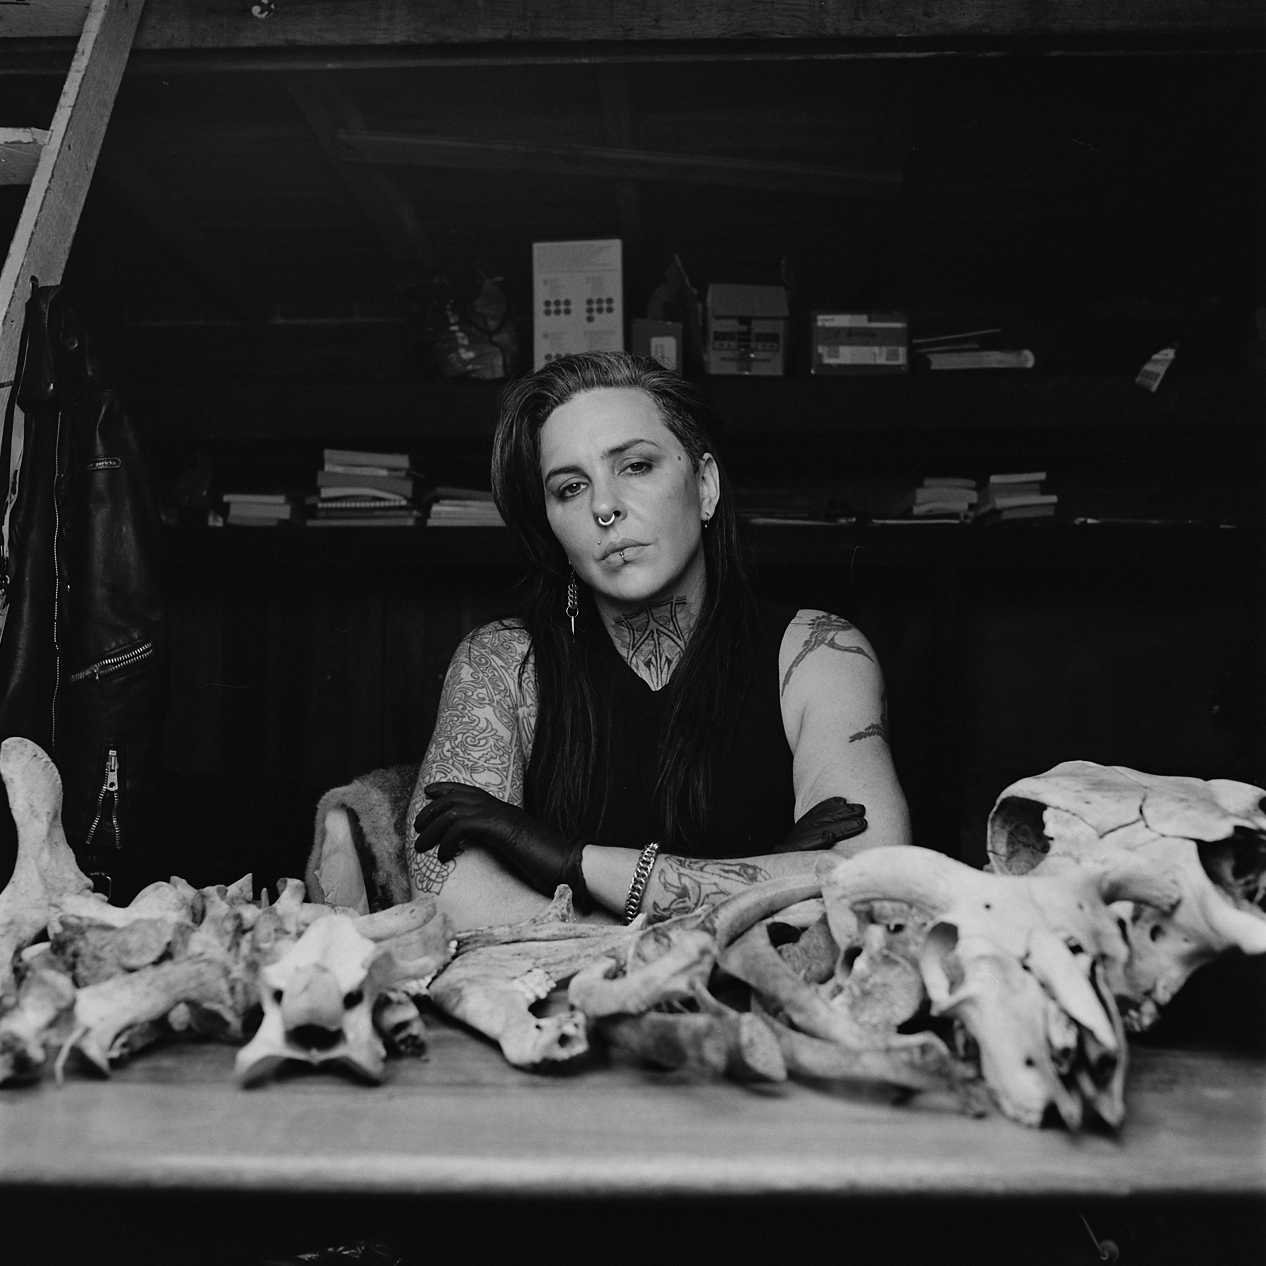 A black and white image of a young man with long hair sitting behind a collection of animal bones arranged in a row on a wooden bench 